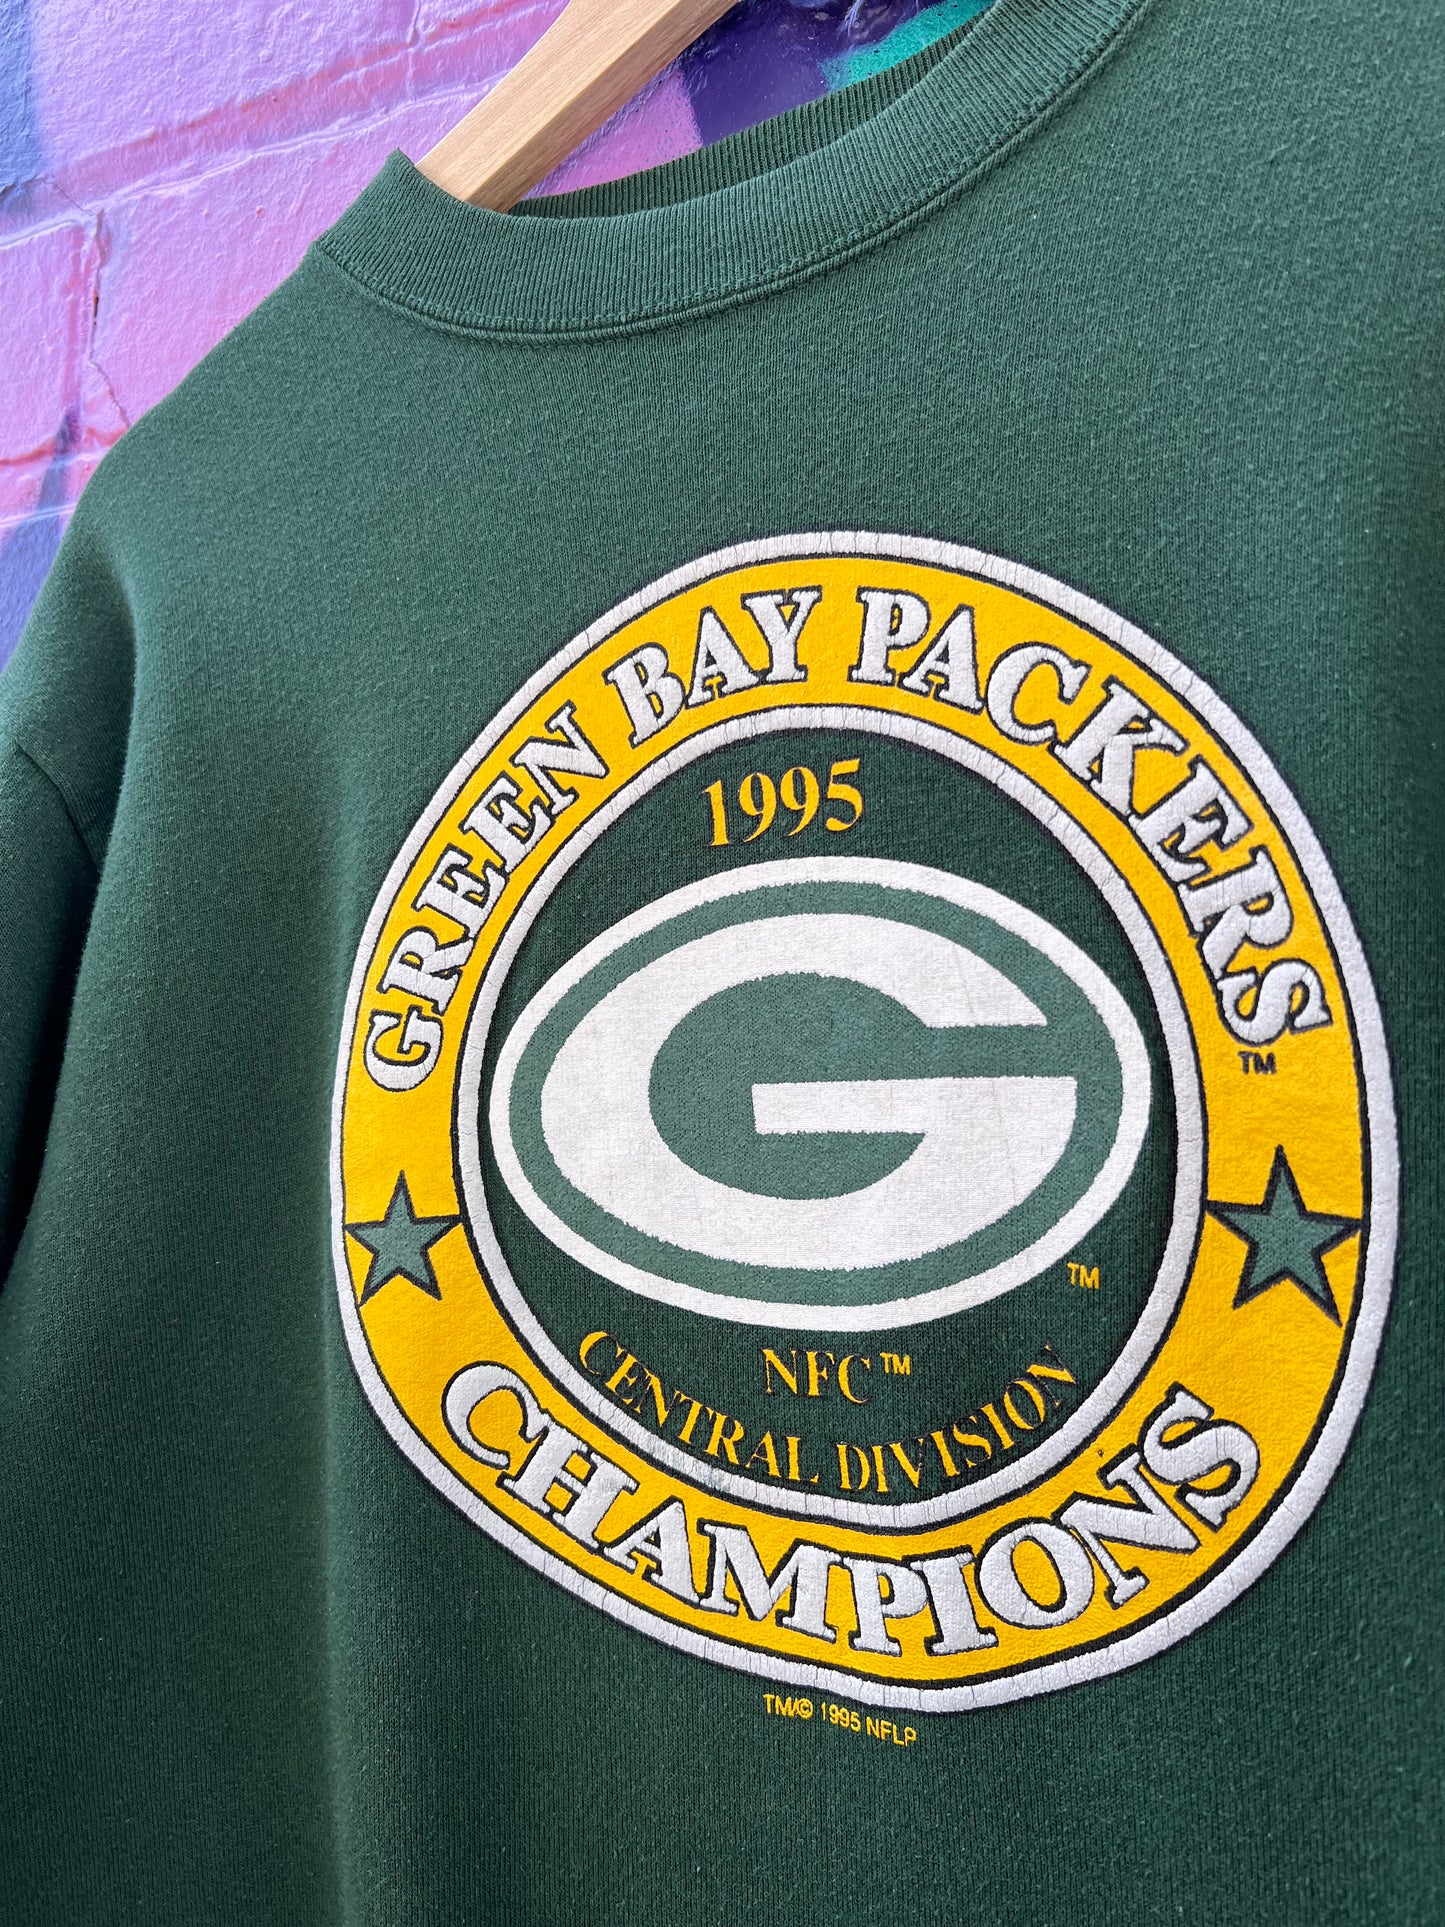 S/M - 1995 Green Bay Packers Sweat